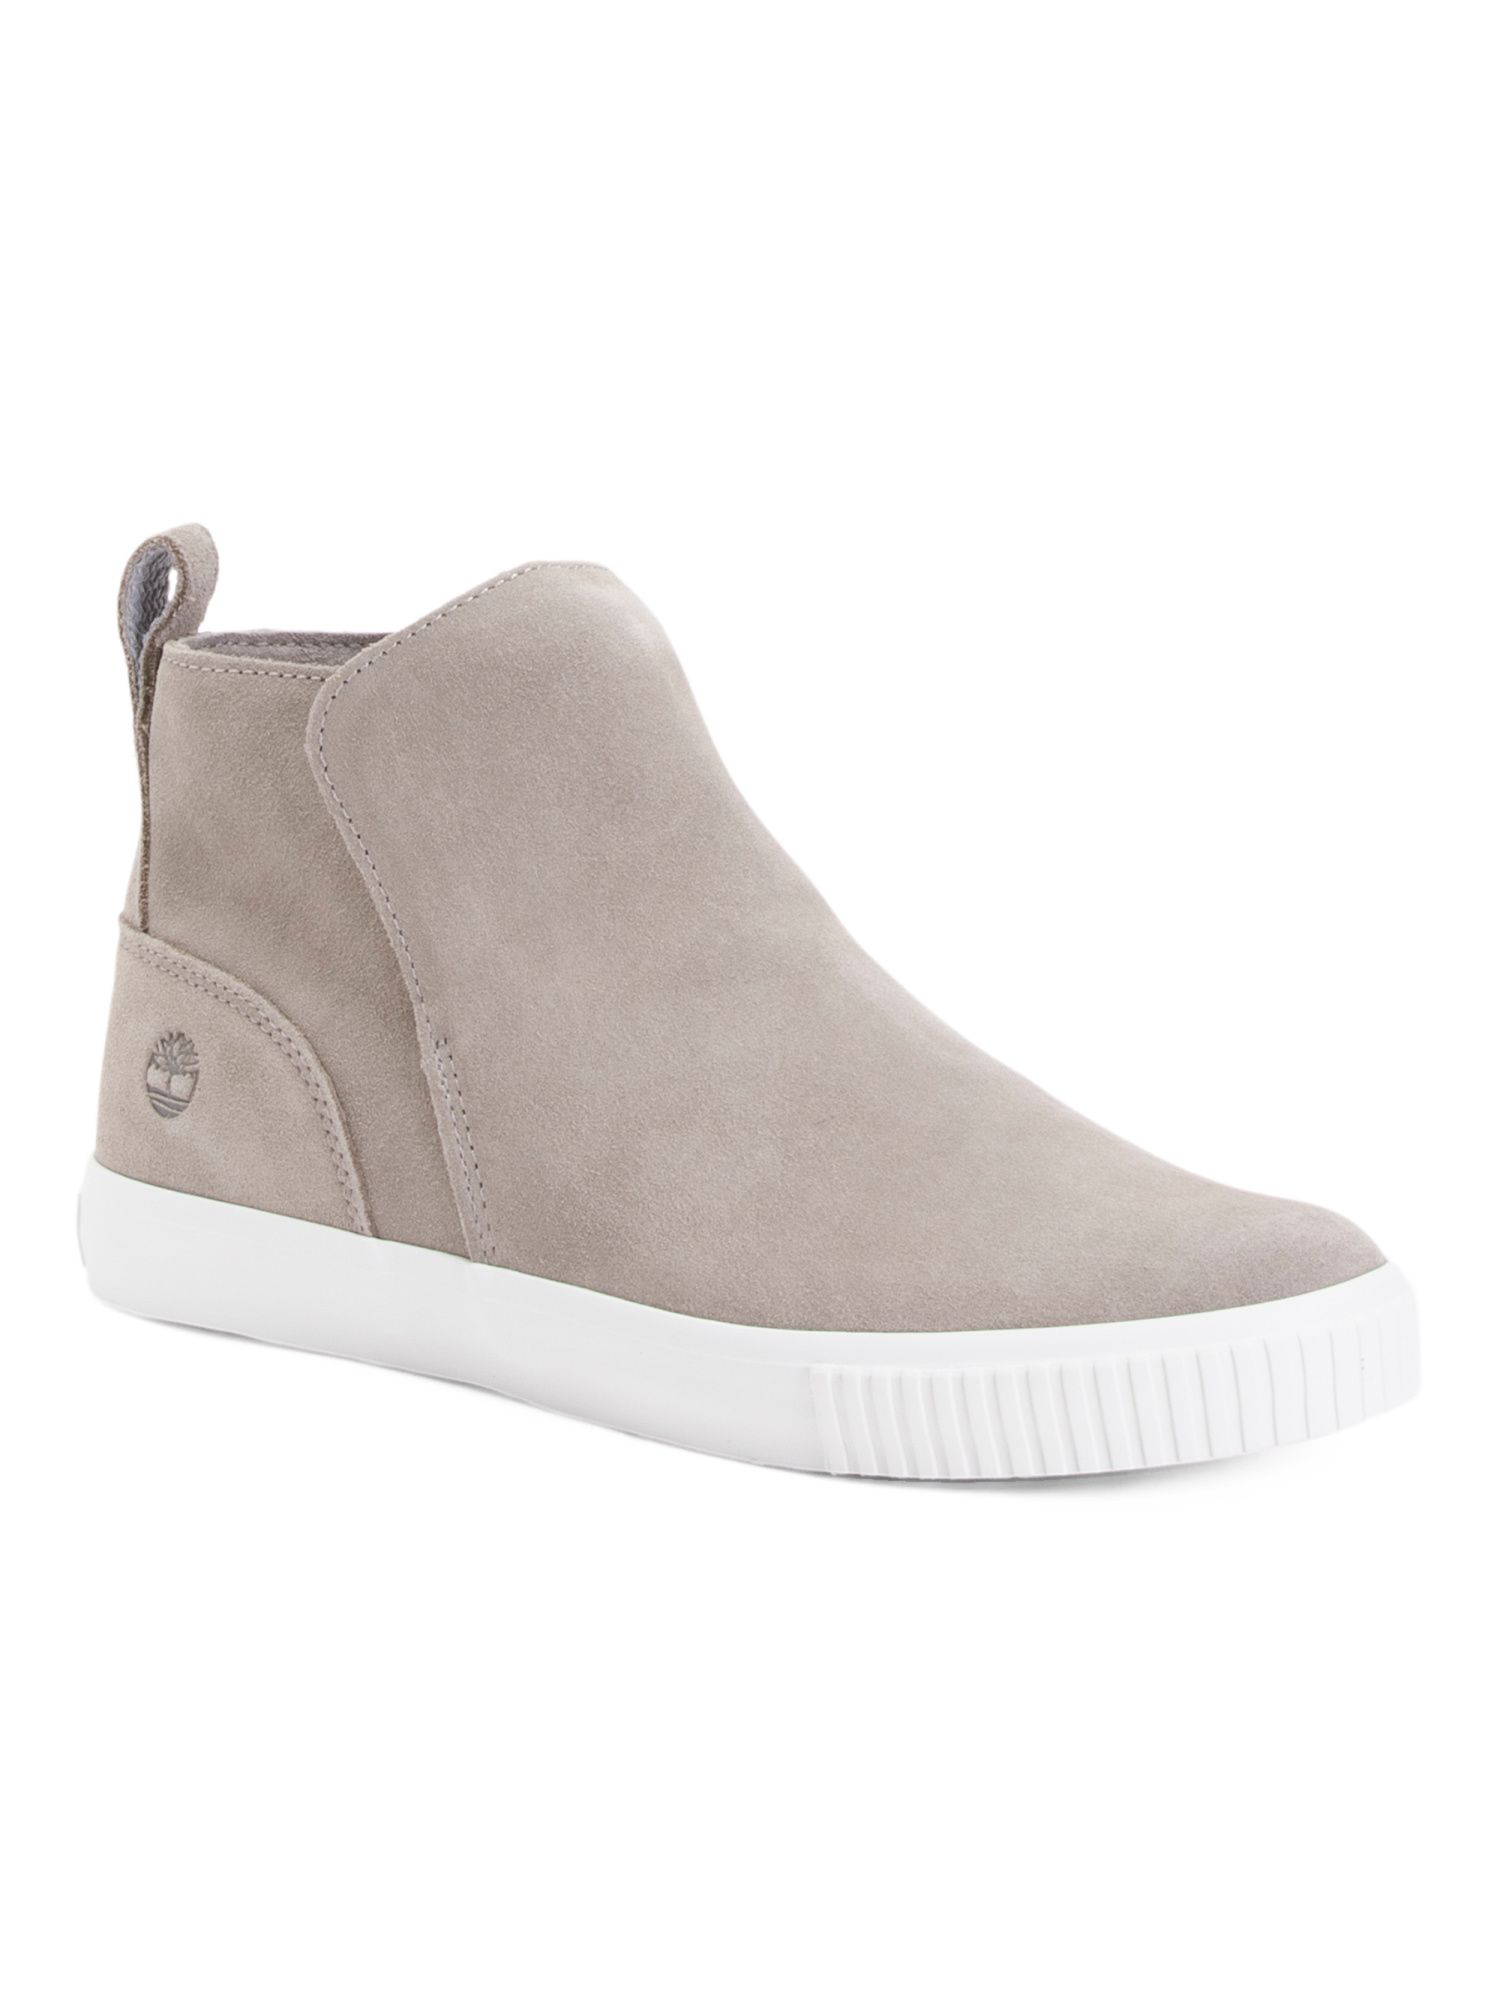 Suede Pull On Sneakers | TJ Maxx